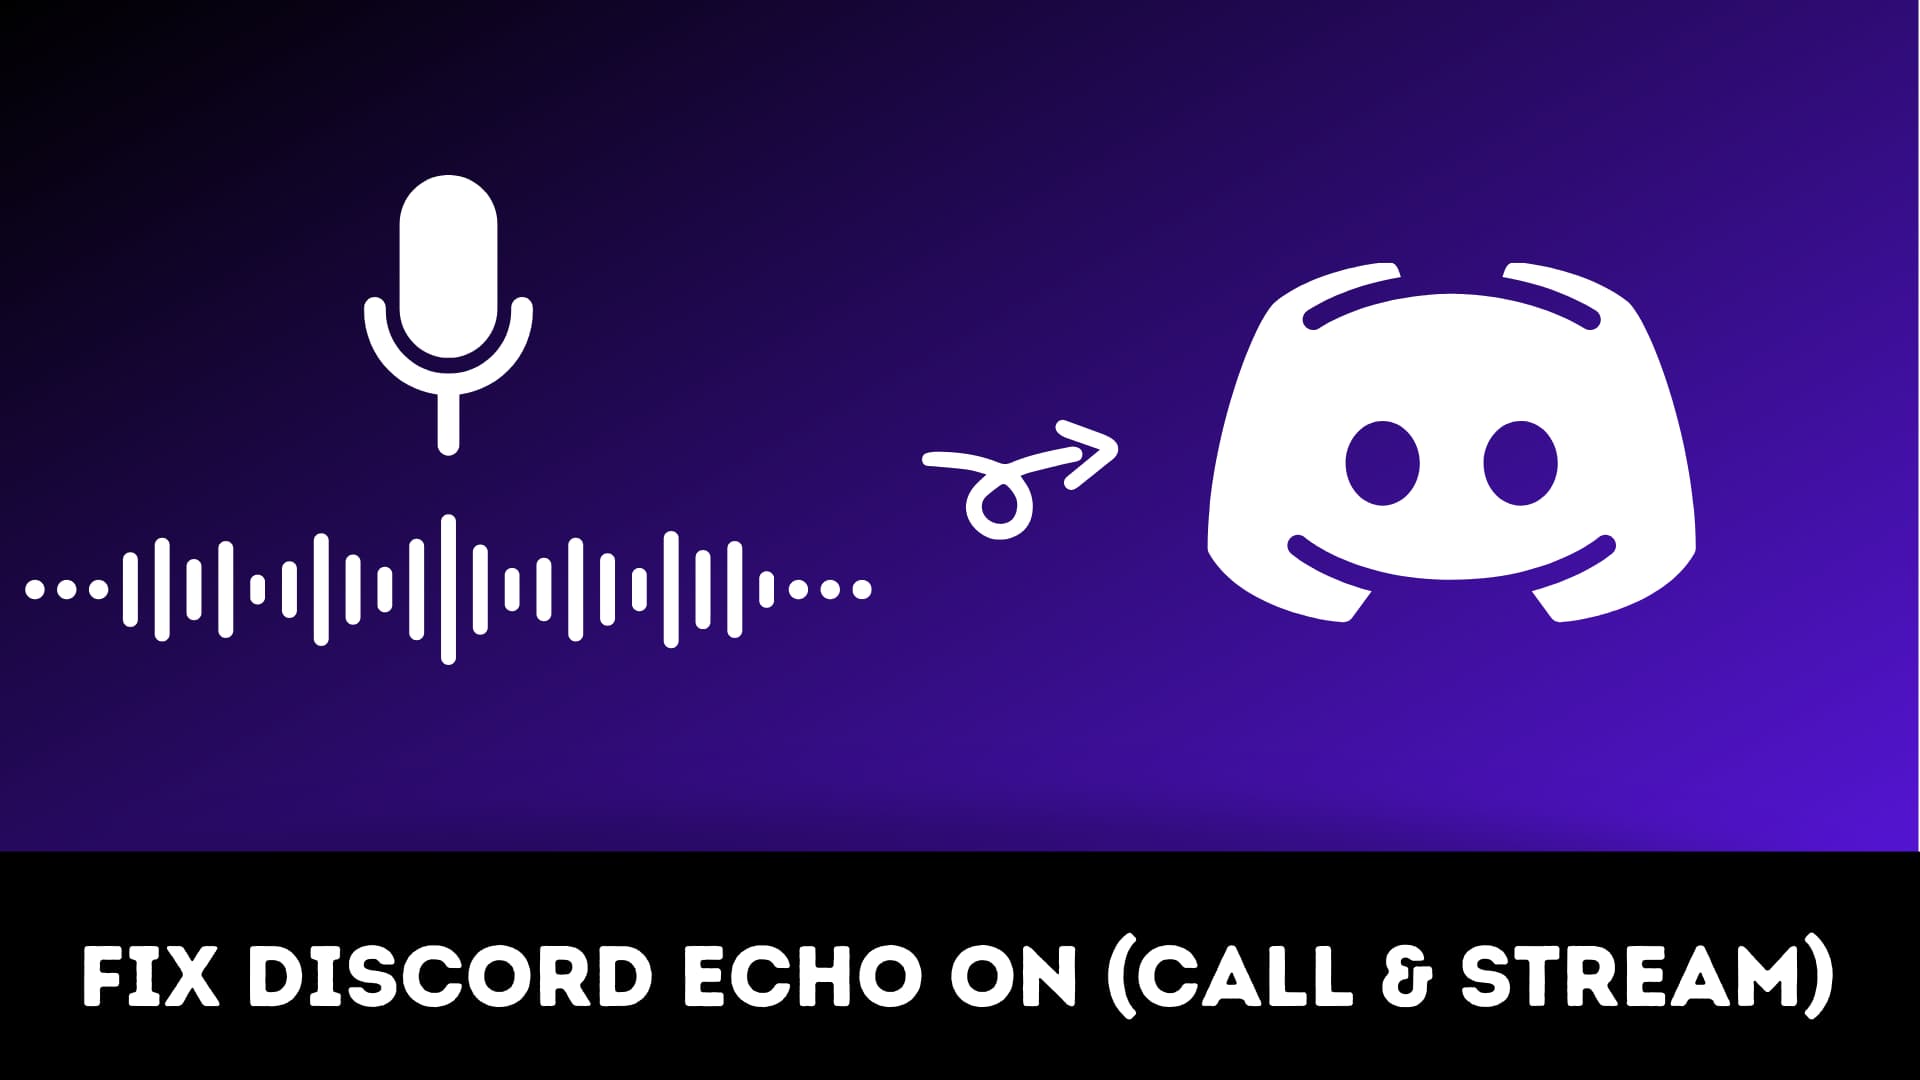 How to Fix Discord Echo